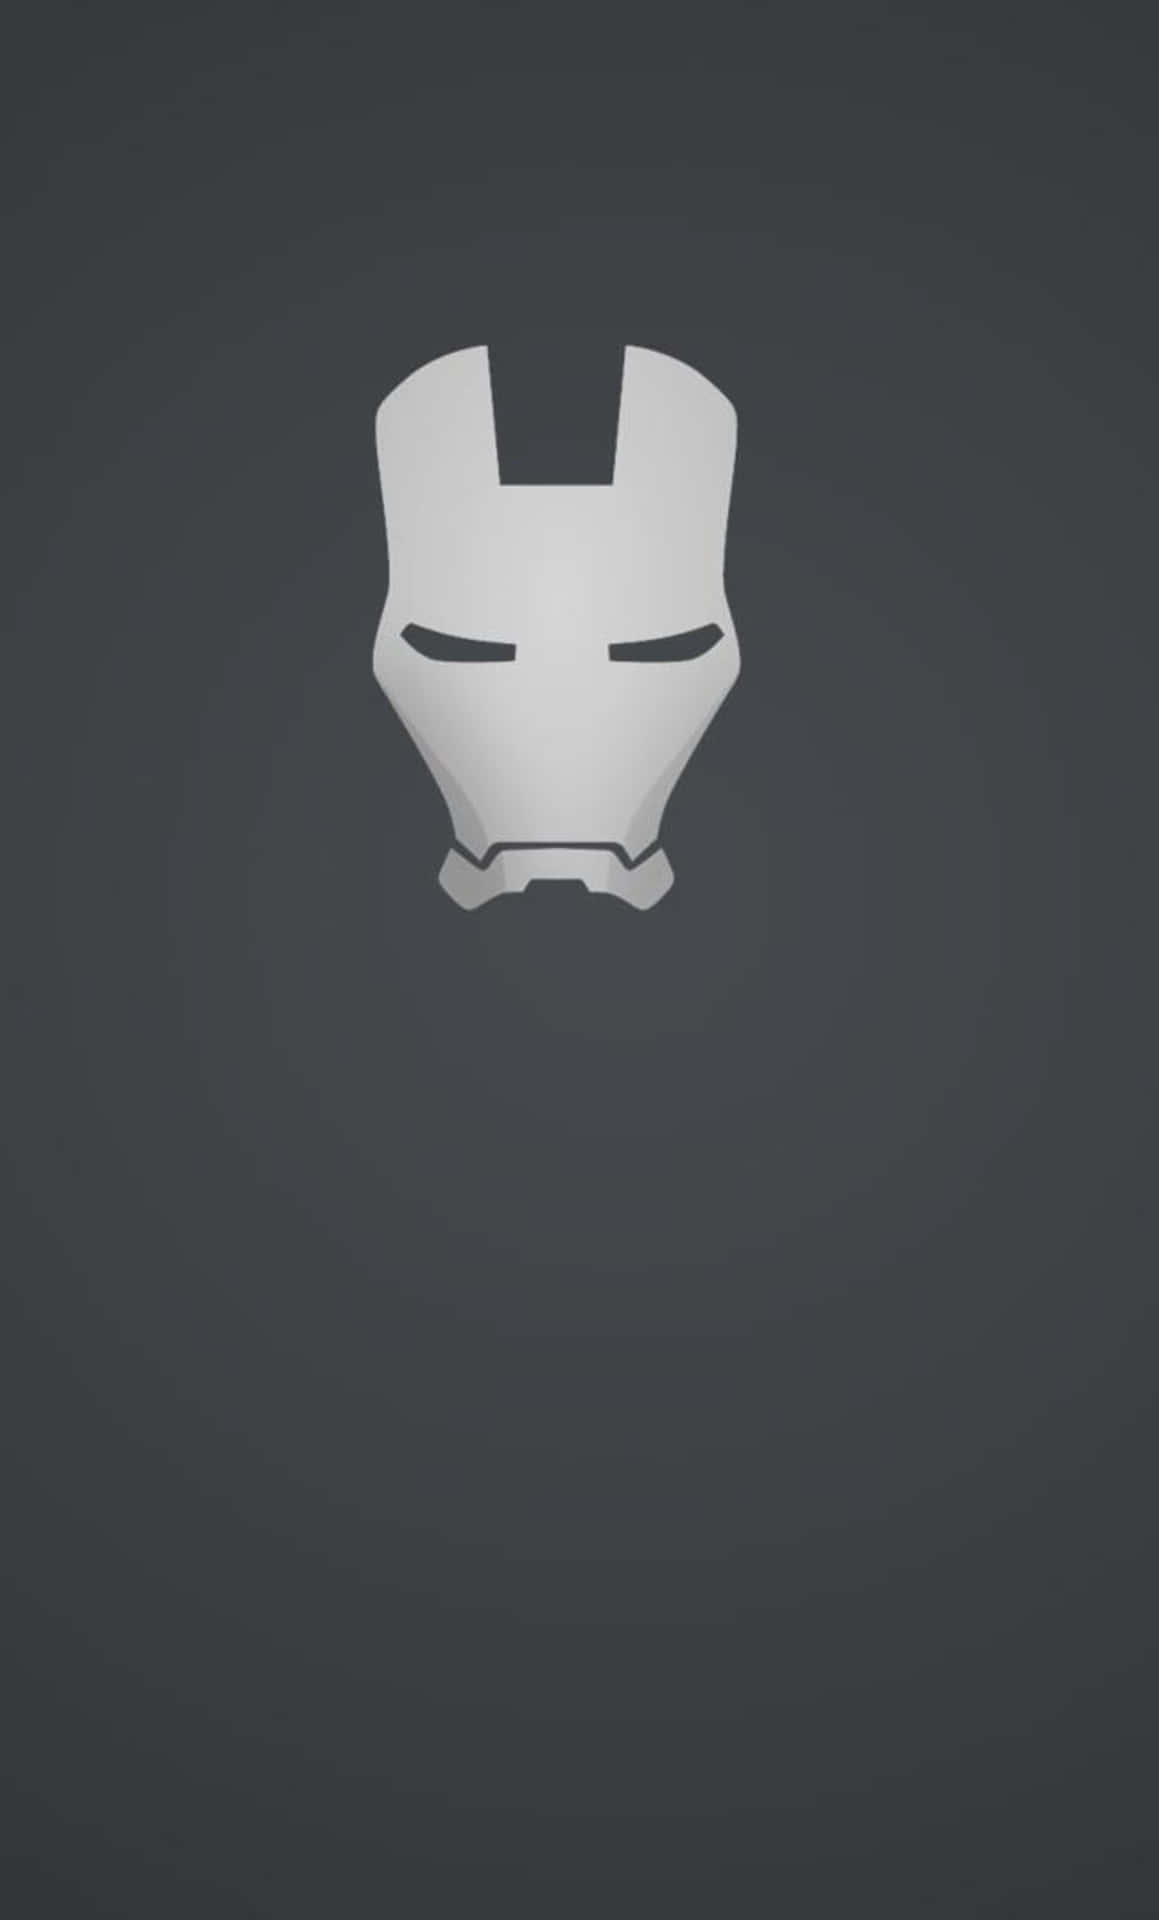 Get your own Cool Iron Man Iphone Wallpaper